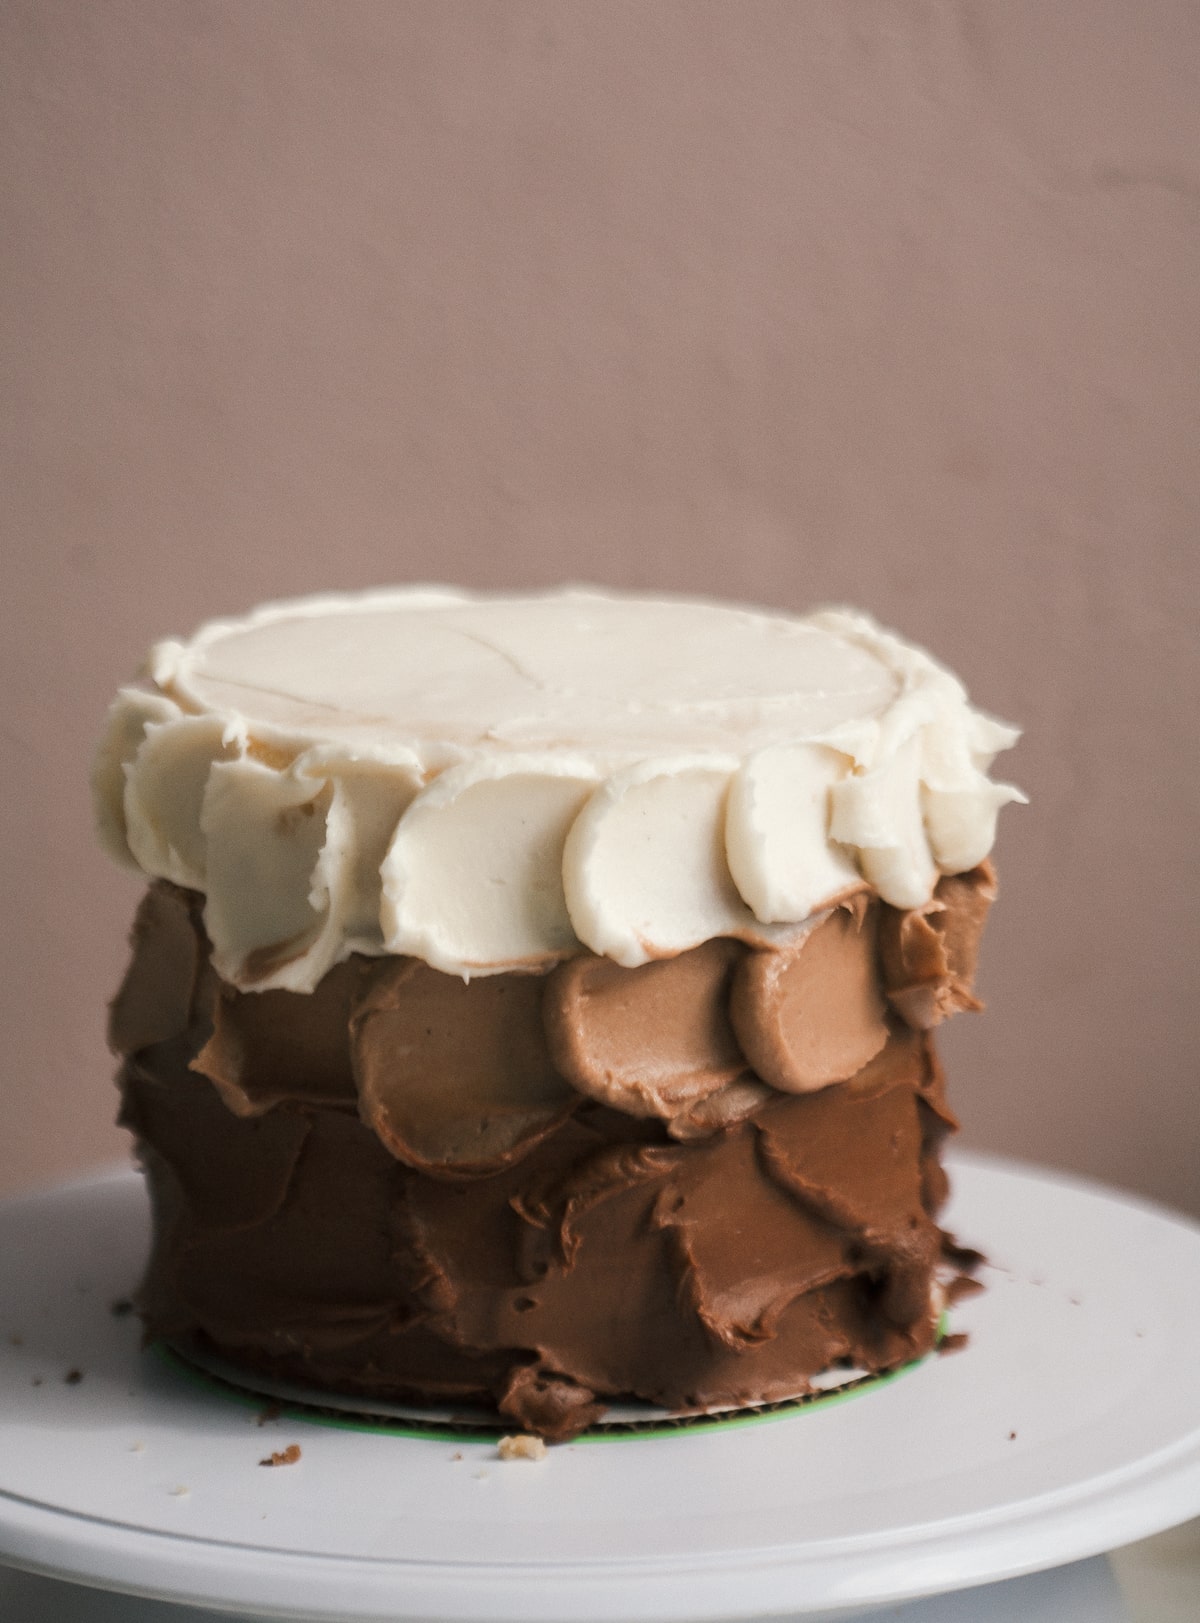 Ombre Chocolate Cake with Mexican Chocolate Frosting